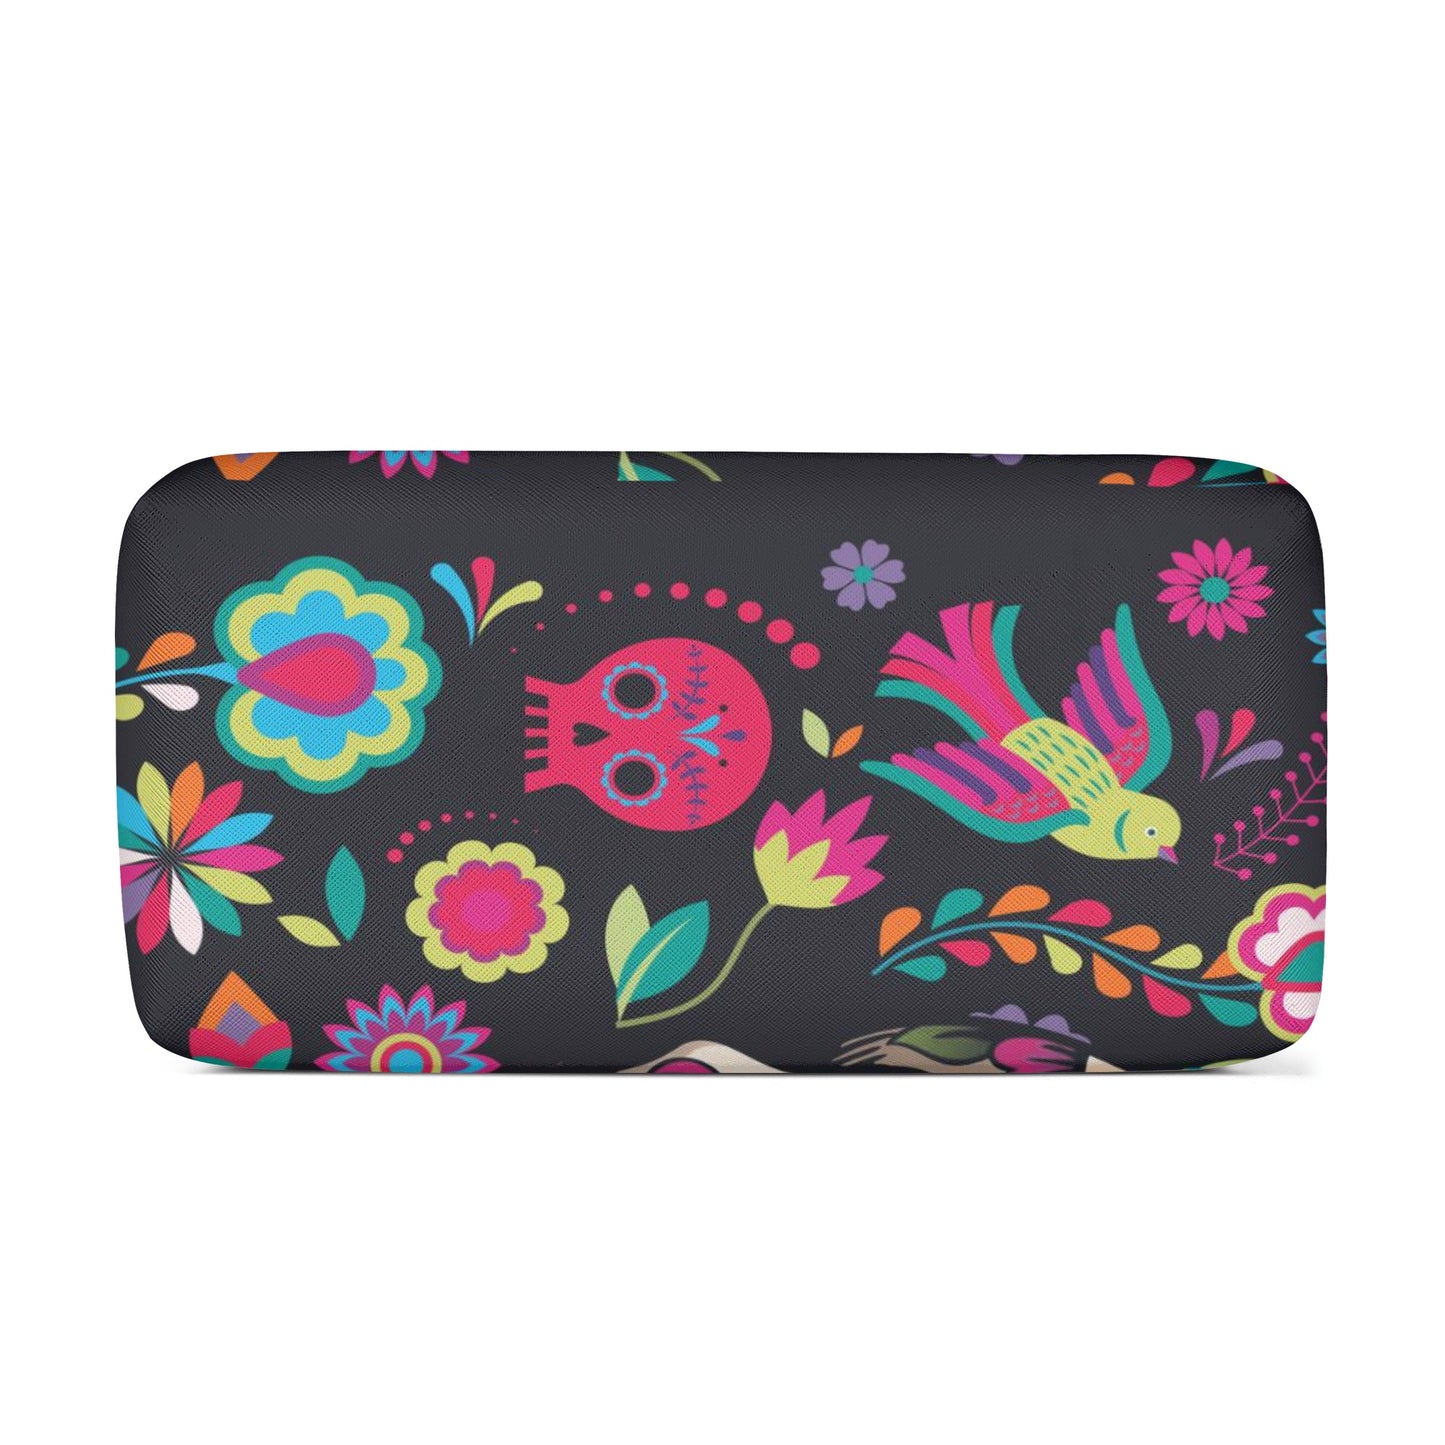 Sugar skull Day of the dead Halloweeen gothic PU Cosmetic Bag